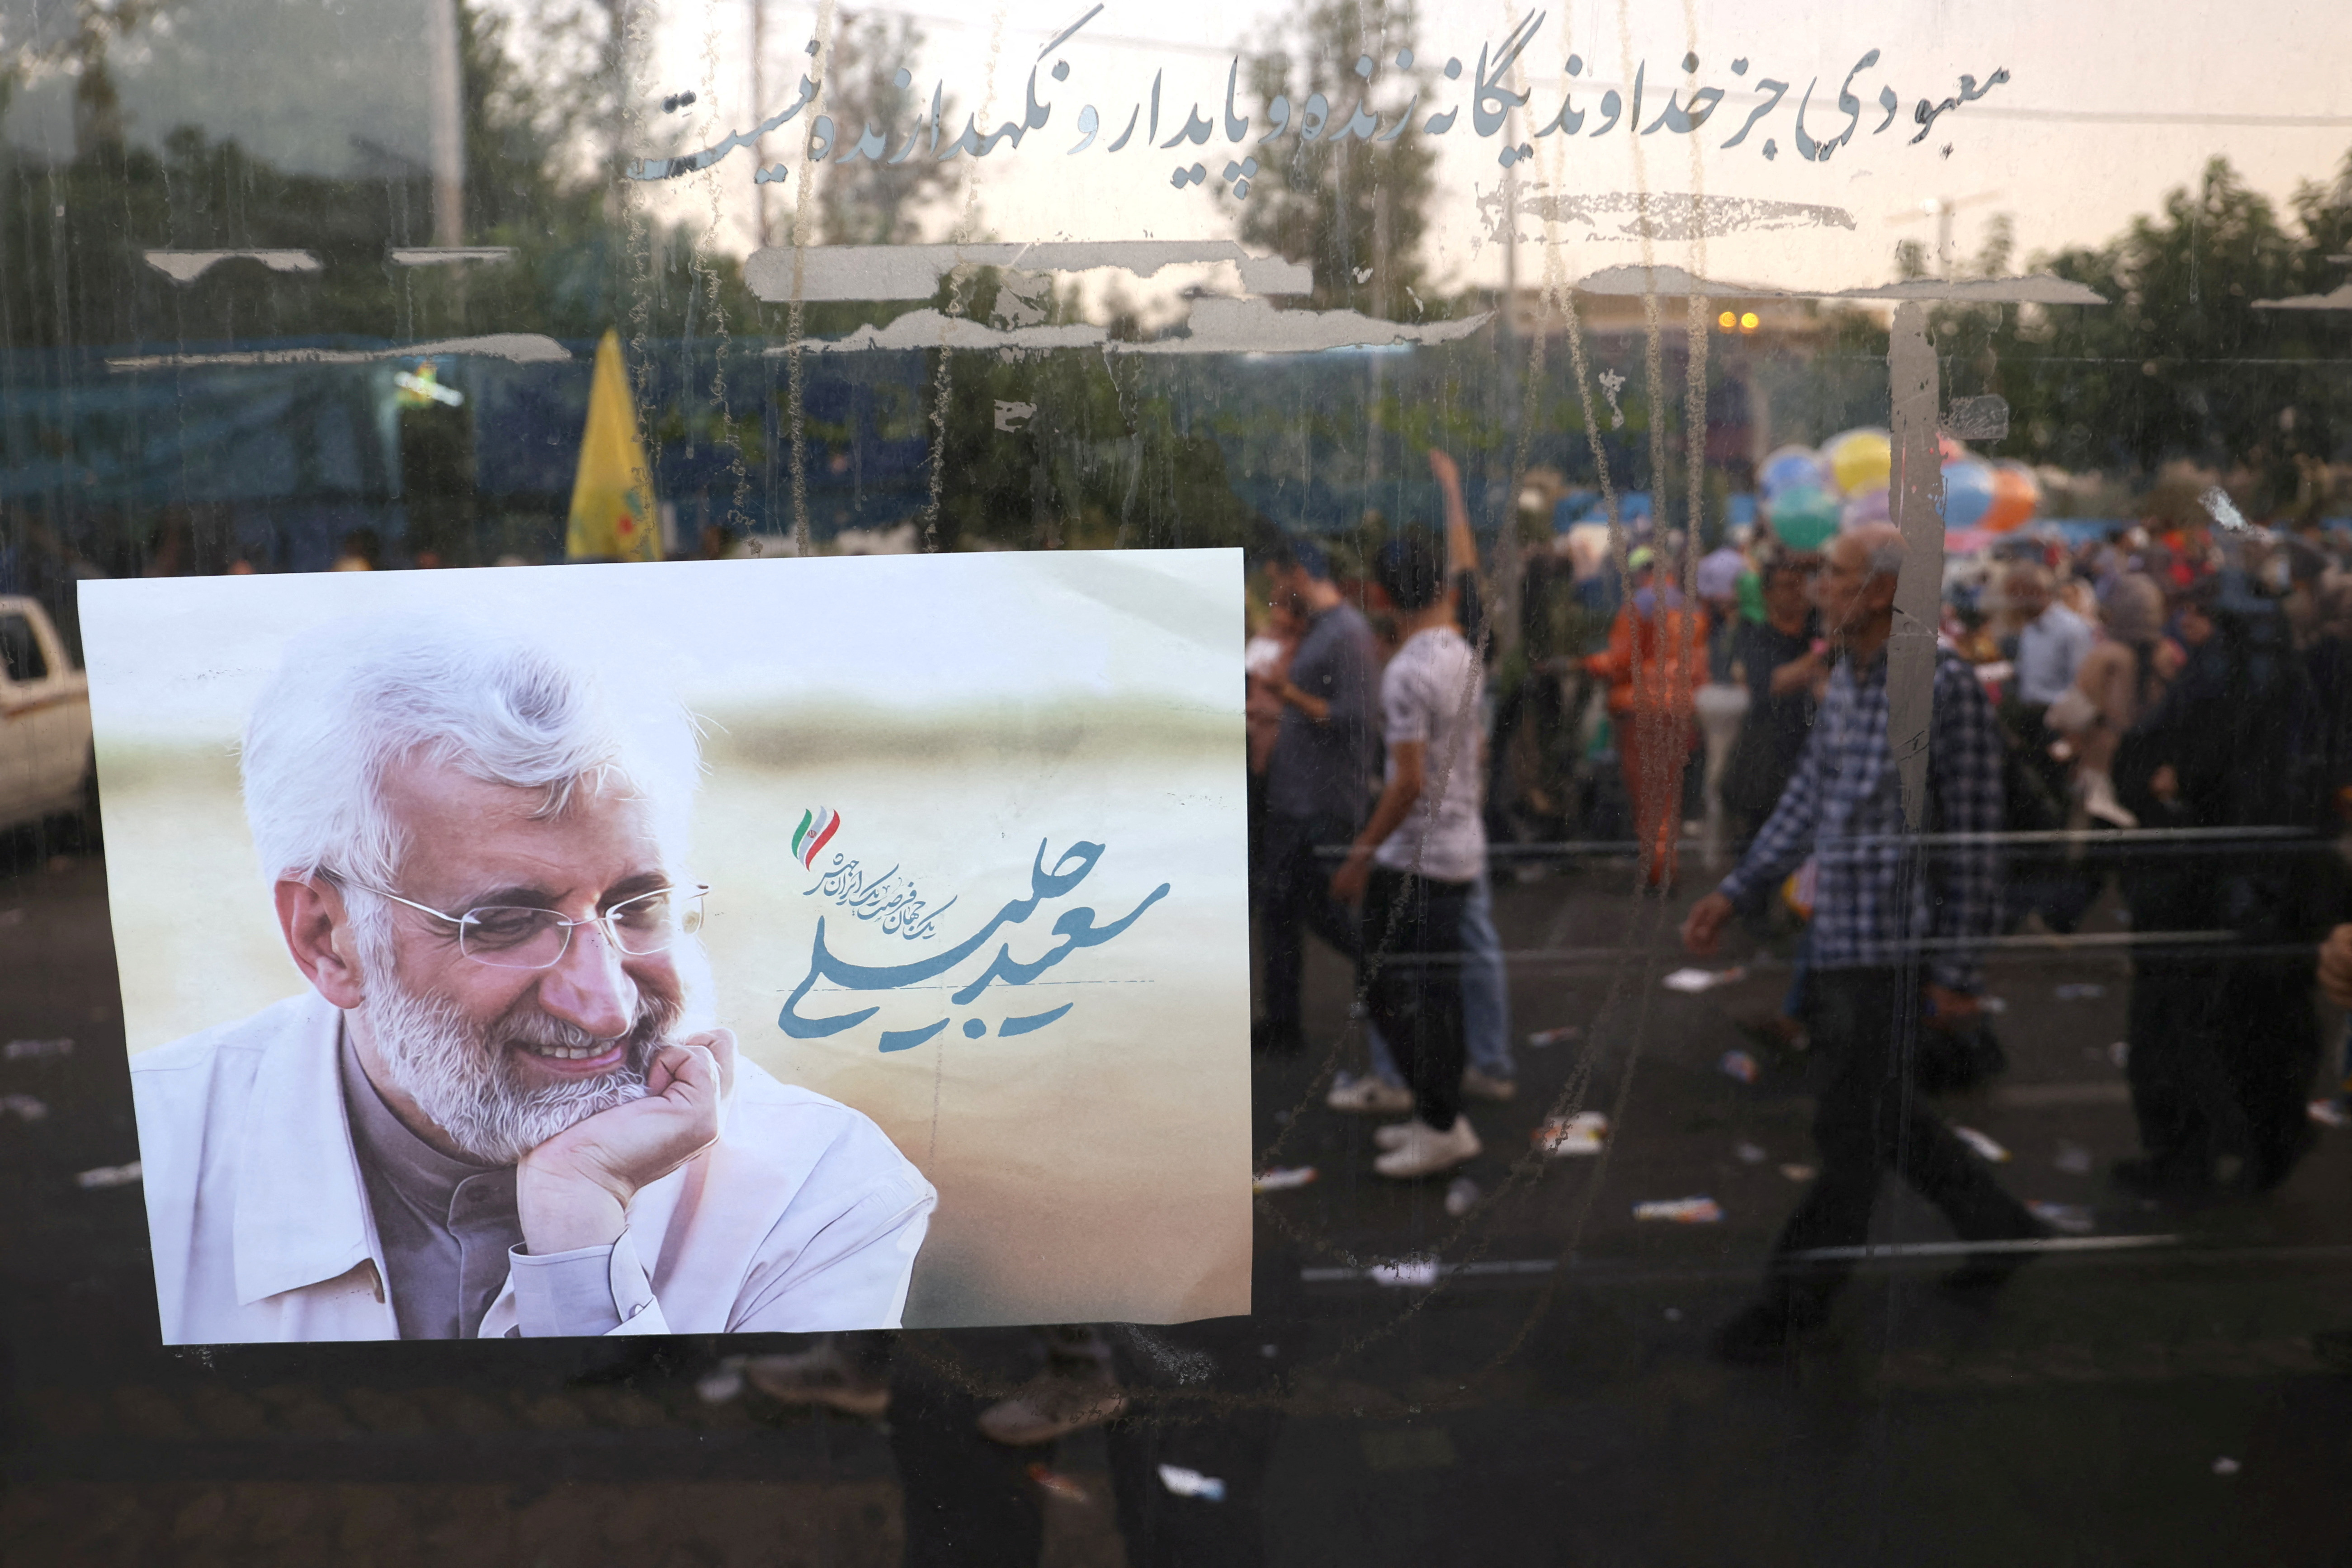 A poster of Iranian presidential candidate Saeed Jalili is seen on a street in Tehran